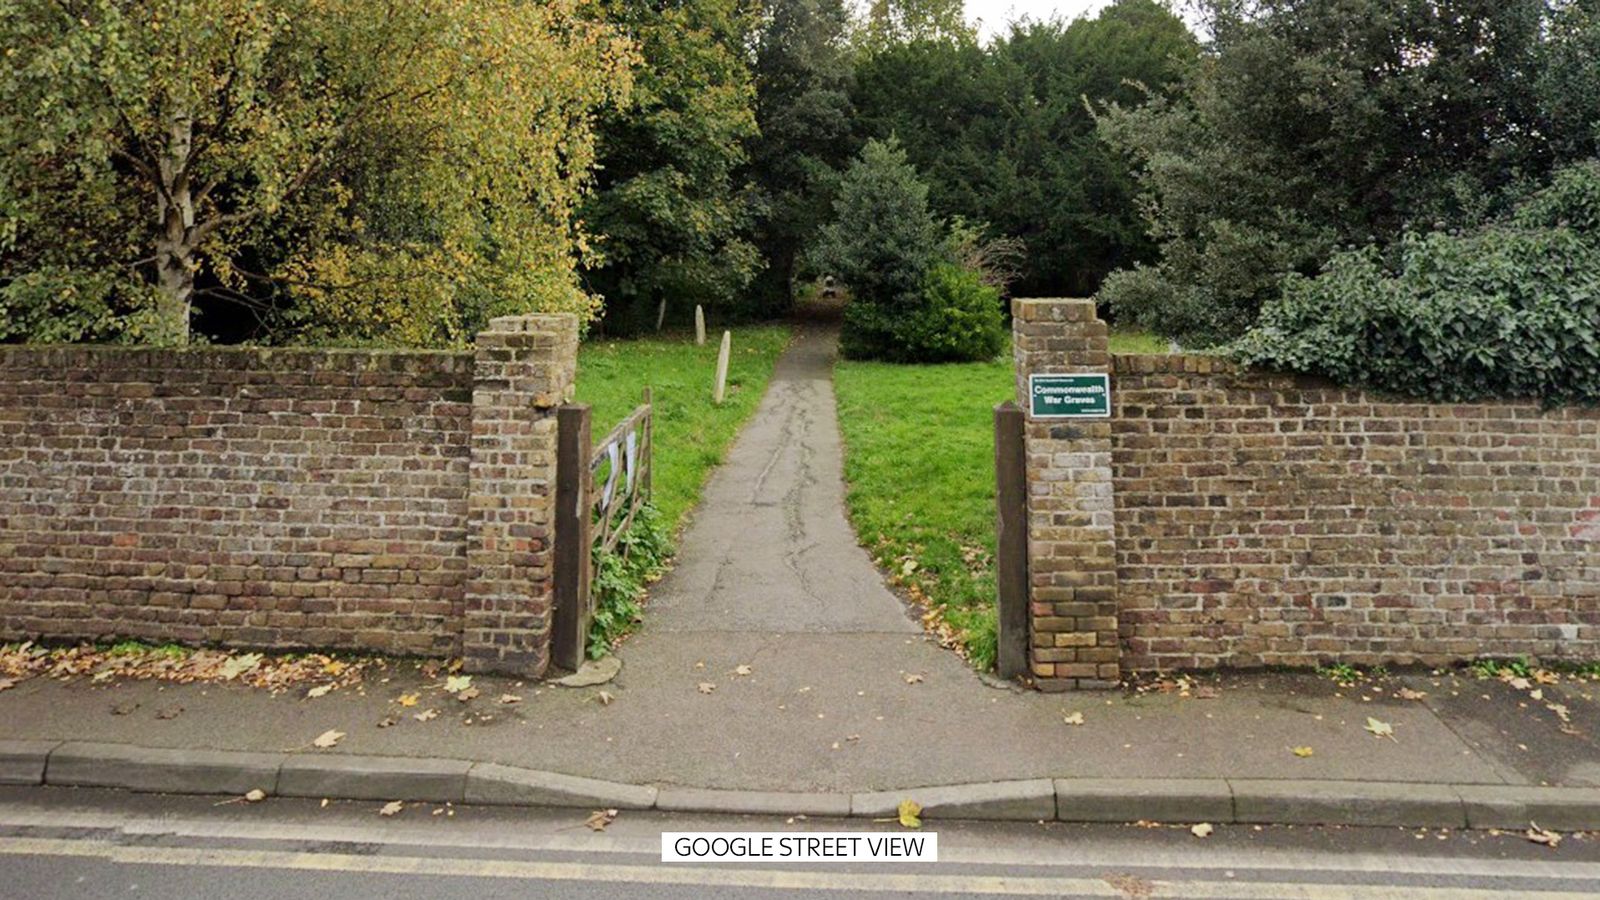 Ramsgate: Man suffers burn injuries after 'noxious substance' thrown at him in graveyard